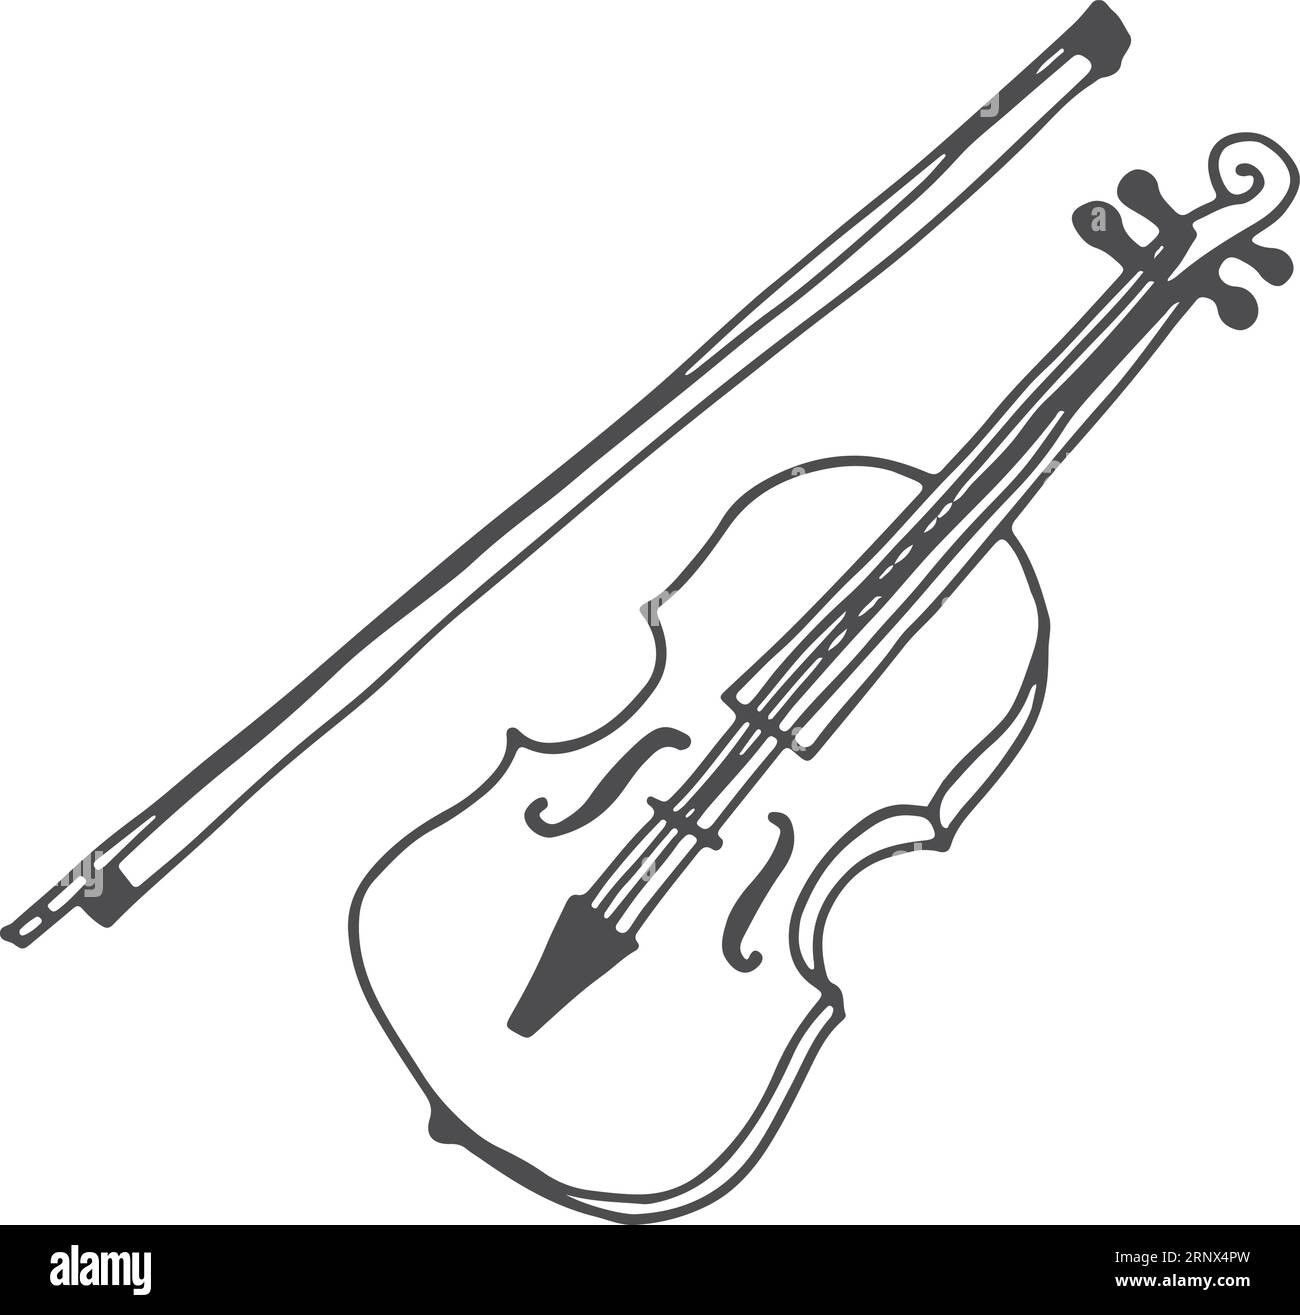 Violin drawing. Hand drawn classic music icon Stock Vector